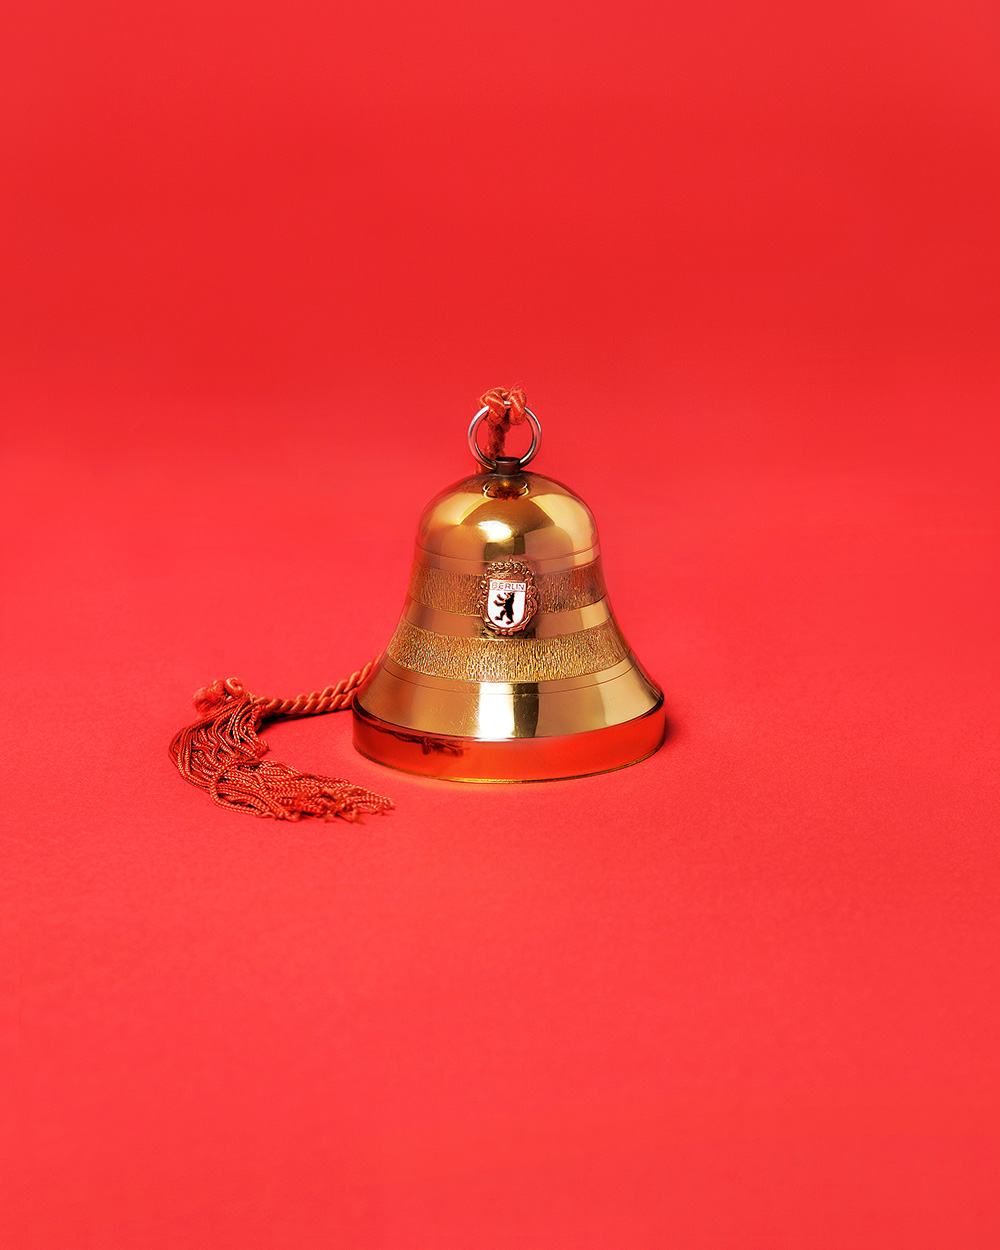 Music box in the shape of a bell. Gold. Coat of arms with inscription Berlin on red background.